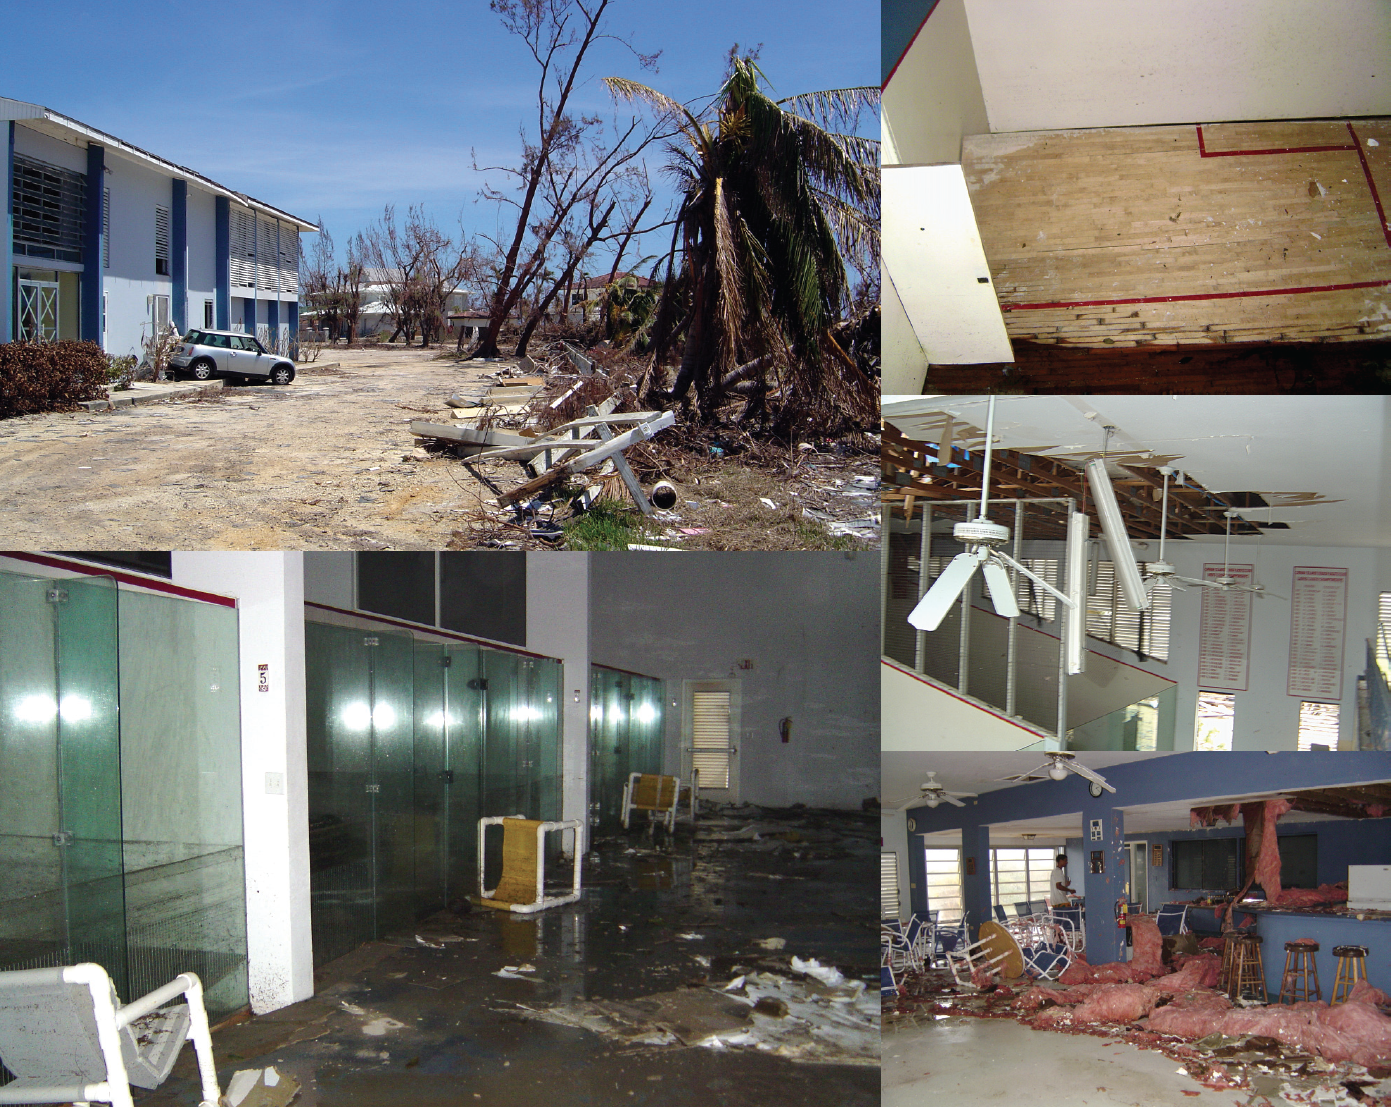 The 2004 Hurricane Ivan, one of the most intense Atlantic Hurricanes ever recorded, over 25% of the buildings in the Cayman Islands were left uninhabitable, with over 95% of all the structures suffering significant damage. The Cayman Squash Club was not spared by the storm surge or high winds. But the club's resiliency resulted in being re-opened 12 months later. By 2009, the Club hosted its first major professional tournament featuring seven of the world's top-10 women, including World No. 1, Nicol David (below). Facing American Natalie Grainger, David won that inaugural event in three games witnessed by enthusiastic supporters of the game. 